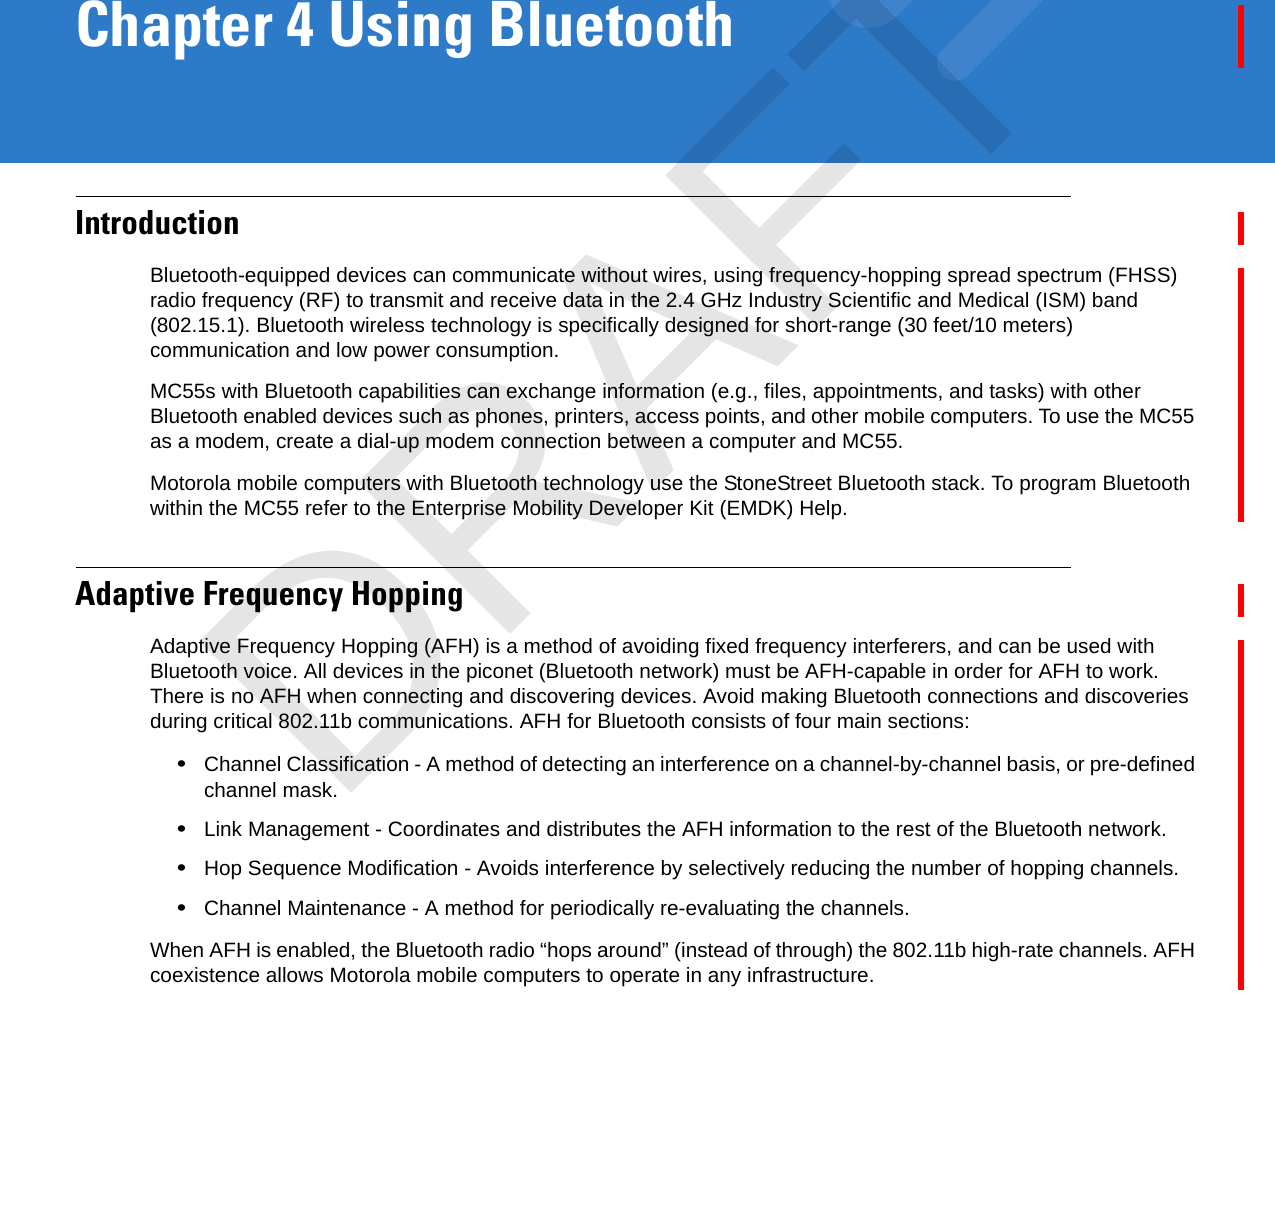 Chapter 4 Using BluetoothIntroductionBluetooth-equipped devices can communicate without wires, using frequency-hopping spread spectrum (FHSS) radio frequency (RF) to transmit and receive data in the 2.4 GHz Industry Scientific and Medical (ISM) band (802.15.1). Bluetooth wireless technology is specifically designed for short-range (30 feet/10 meters) communication and low power consumption. MC55s with Bluetooth capabilities can exchange information (e.g., files, appointments, and tasks) with other Bluetooth enabled devices such as phones, printers, access points, and other mobile computers. To use the MC55 as a modem, create a dial-up modem connection between a computer and MC55.Motorola mobile computers with Bluetooth technology use the StoneStreet Bluetooth stack. To program Bluetooth within the MC55 refer to the Enterprise Mobility Developer Kit (EMDK) Help.Adaptive Frequency HoppingAdaptive Frequency Hopping (AFH) is a method of avoiding fixed frequency interferers, and can be used with Bluetooth voice. All devices in the piconet (Bluetooth network) must be AFH-capable in order for AFH to work. There is no AFH when connecting and discovering devices. Avoid making Bluetooth connections and discoveries during critical 802.11b communications. AFH for Bluetooth consists of four main sections:•Channel Classification - A method of detecting an interference on a channel-by-channel basis, or pre-defined channel mask.•Link Management - Coordinates and distributes the AFH information to the rest of the Bluetooth network.•Hop Sequence Modification - Avoids interference by selectively reducing the number of hopping channels.•Channel Maintenance - A method for periodically re-evaluating the channels.When AFH is enabled, the Bluetooth radio “hops around” (instead of through) the 802.11b high-rate channels. AFH coexistence allows Motorola mobile computers to operate in any infrastructure. DRAFT